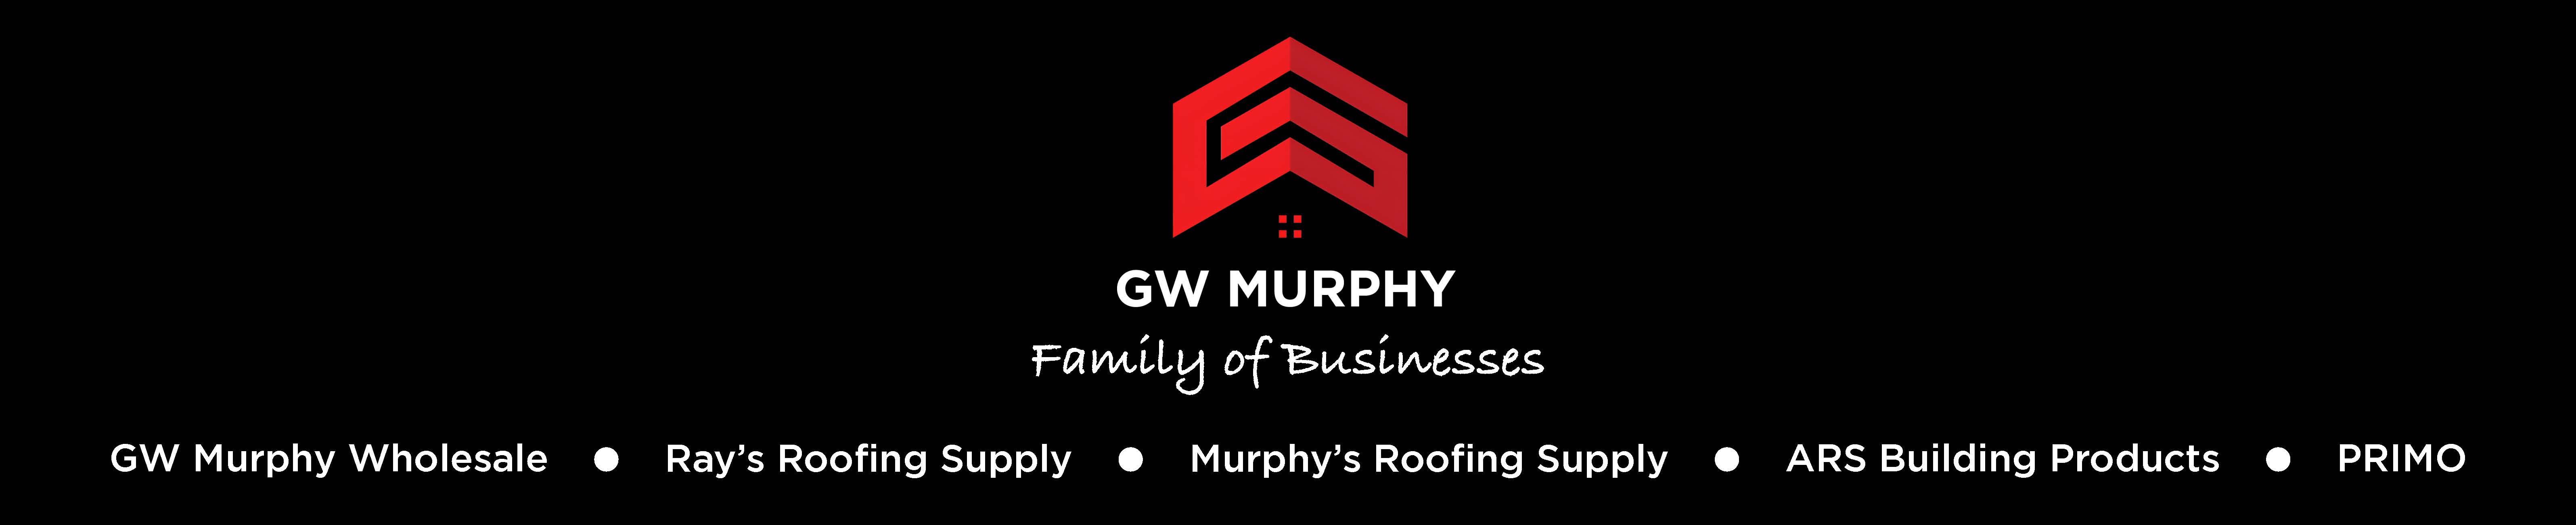 Gw Murphy Family of Businesses Graphic